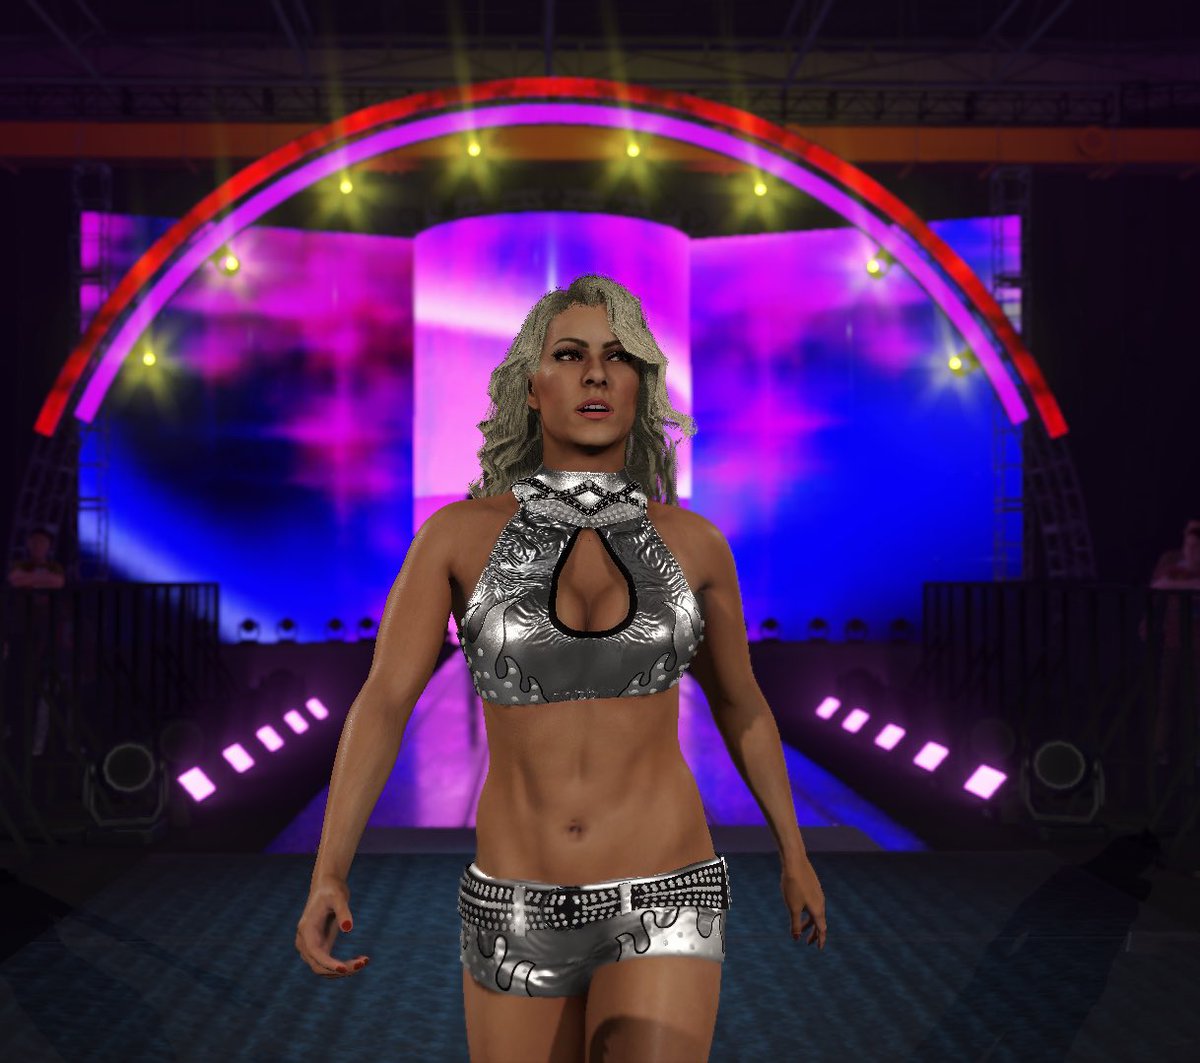 Maryse Alt attires will probably be the first thing I release. Imma make two more of her gears #WWE2K23